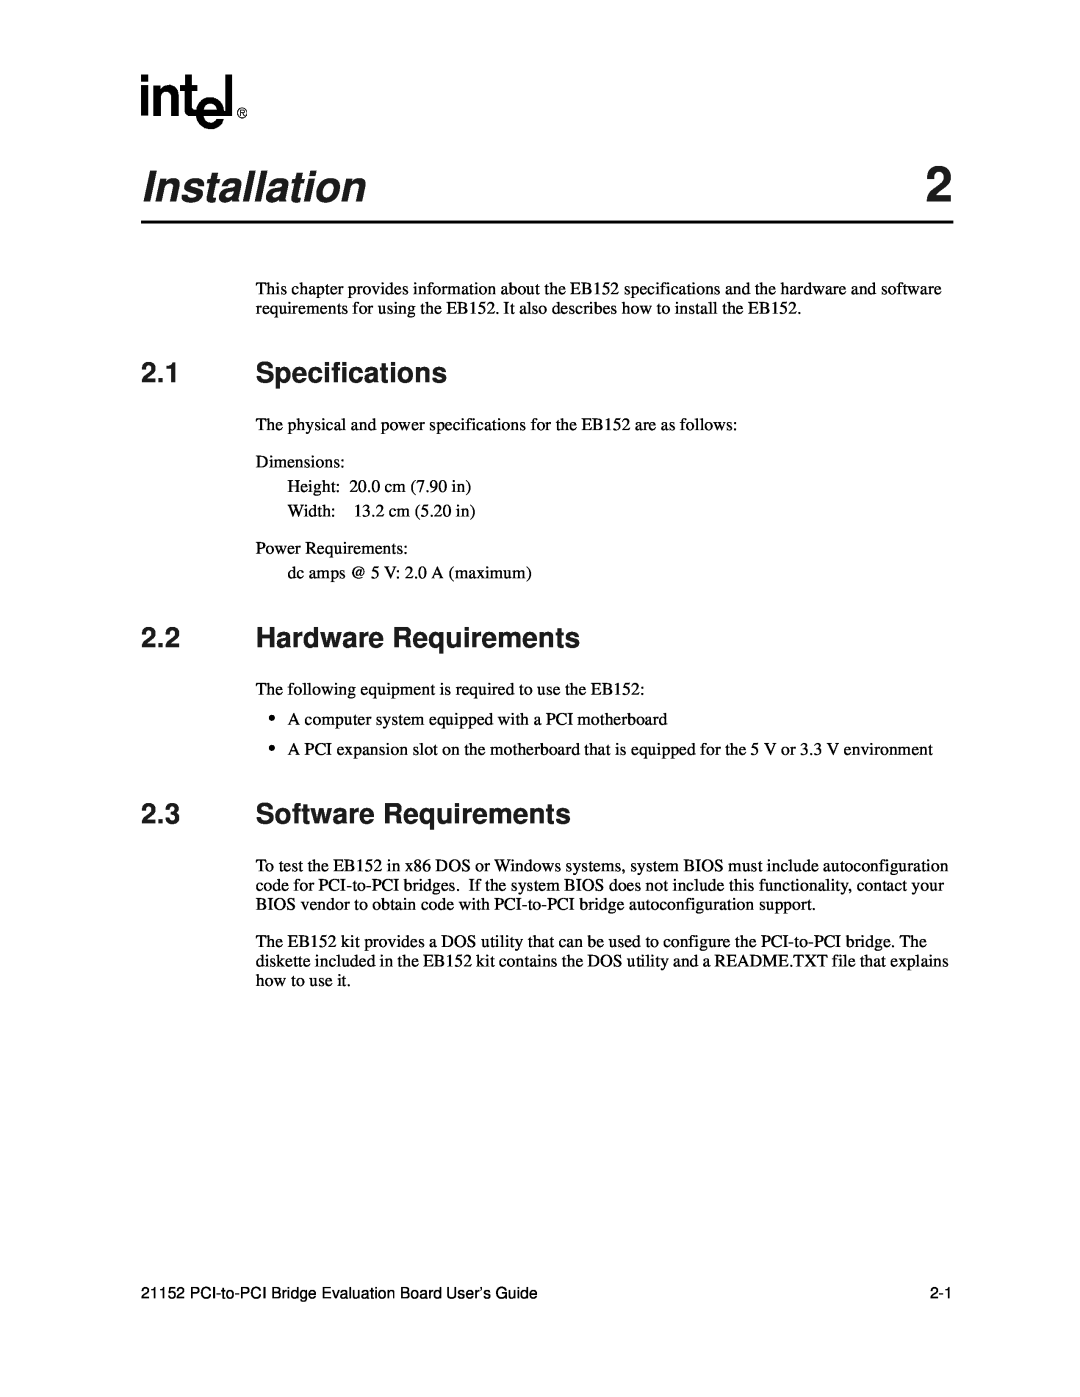 Intel 21152 manual Installation, Specifications, Hardware Requirements, Software Requirements 